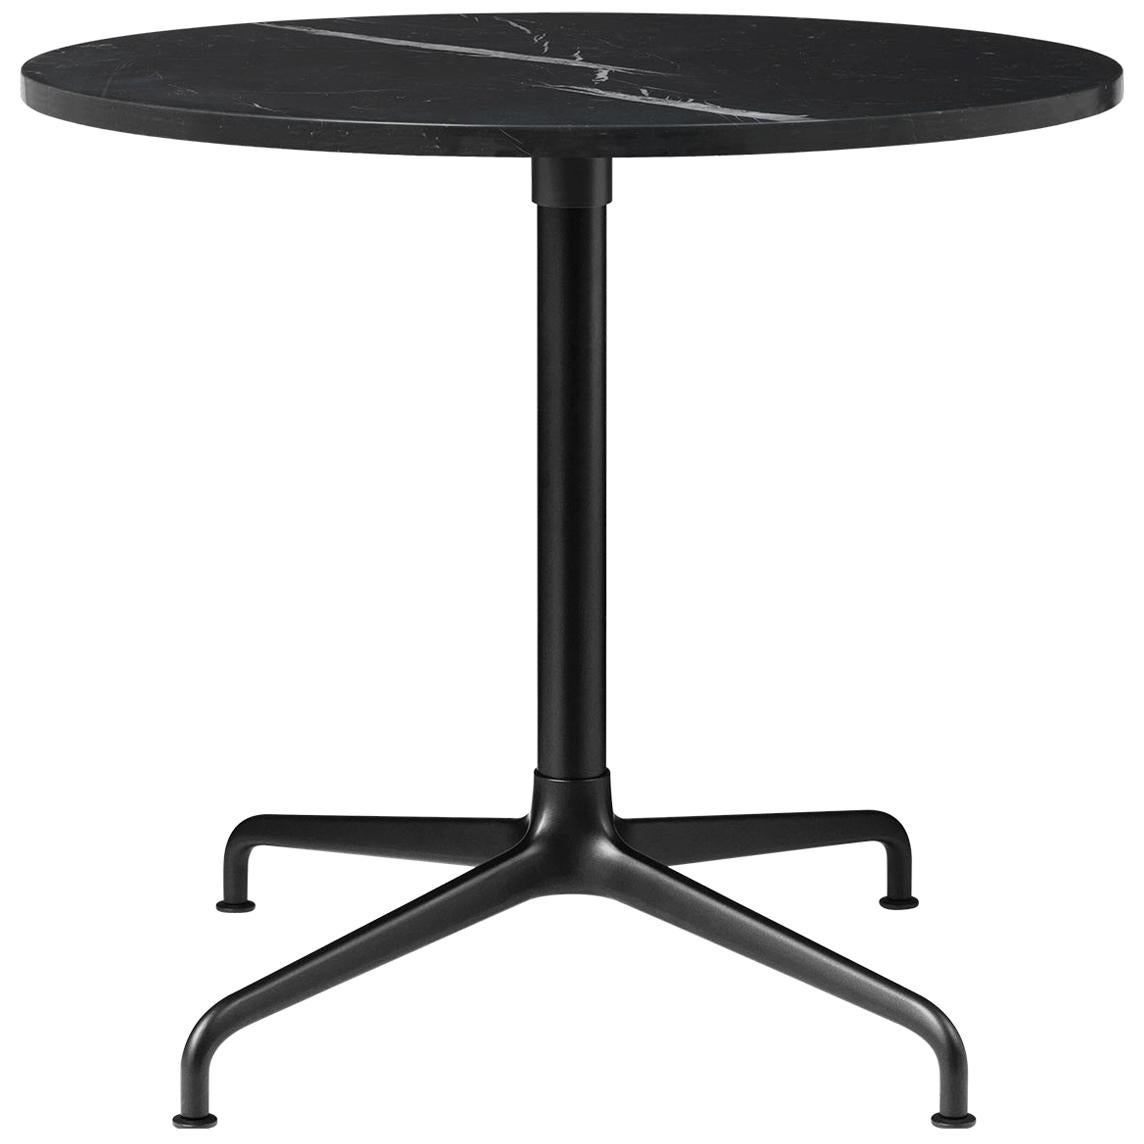 Beetle Lounge Table, Round, 4 Star Base, Large, Marble For Sale